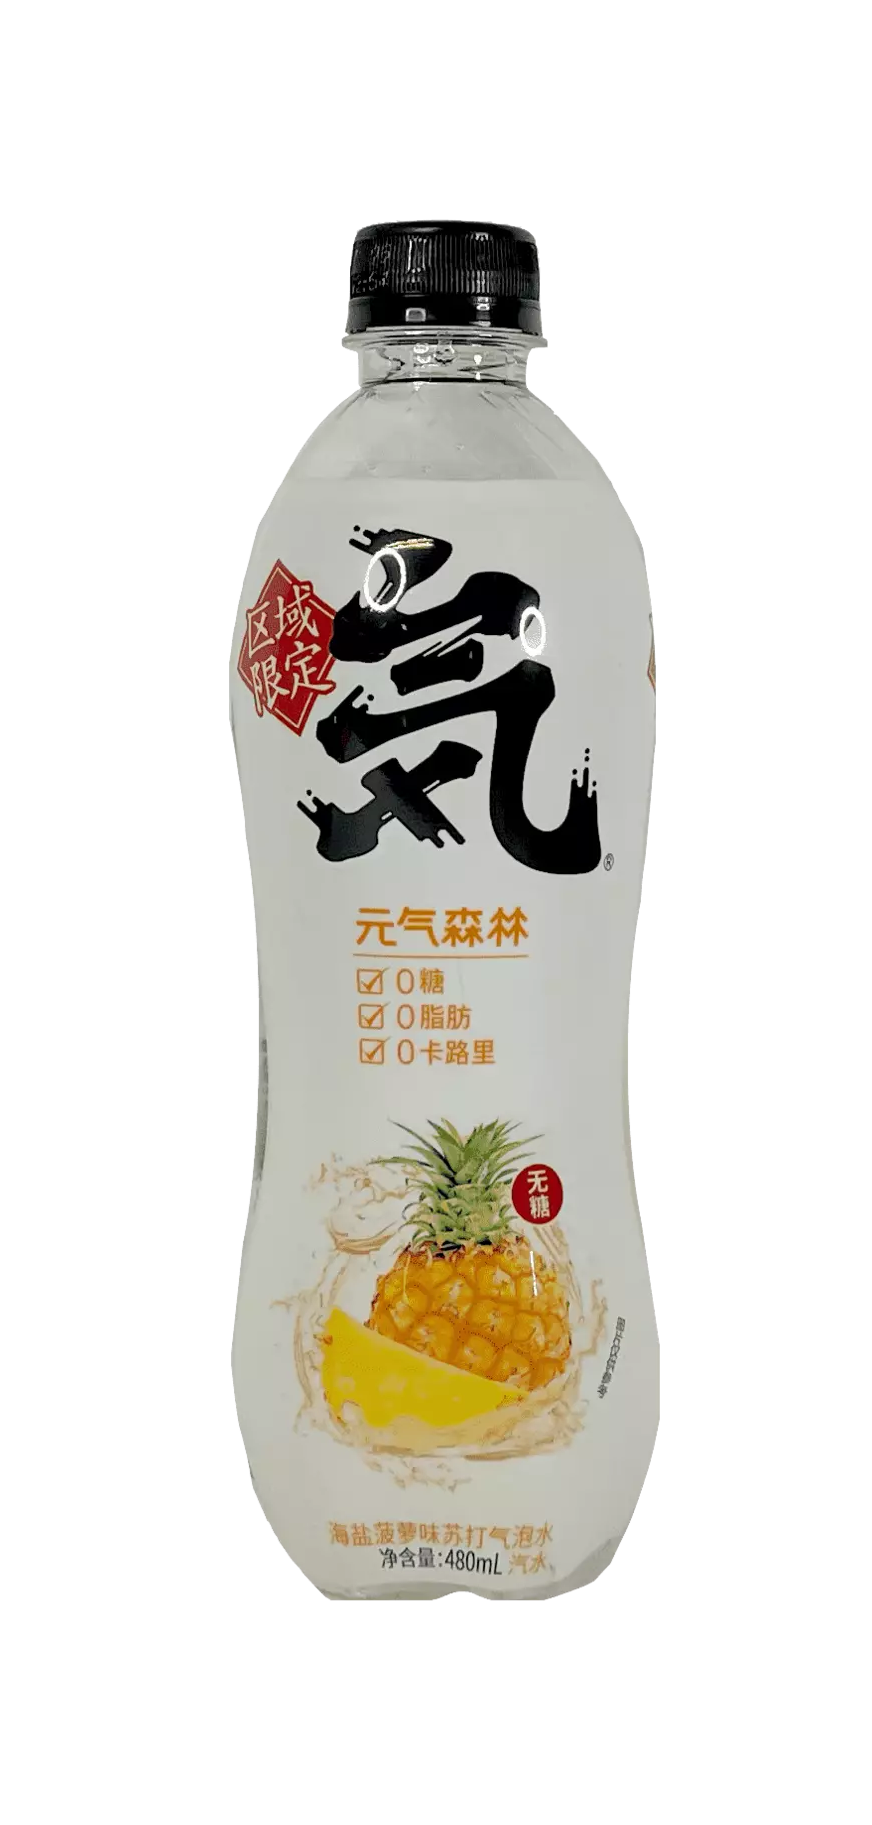 Carbonated Water With Pineapple Taste 480ml / Bottle Yuan Qi Sen Lin China